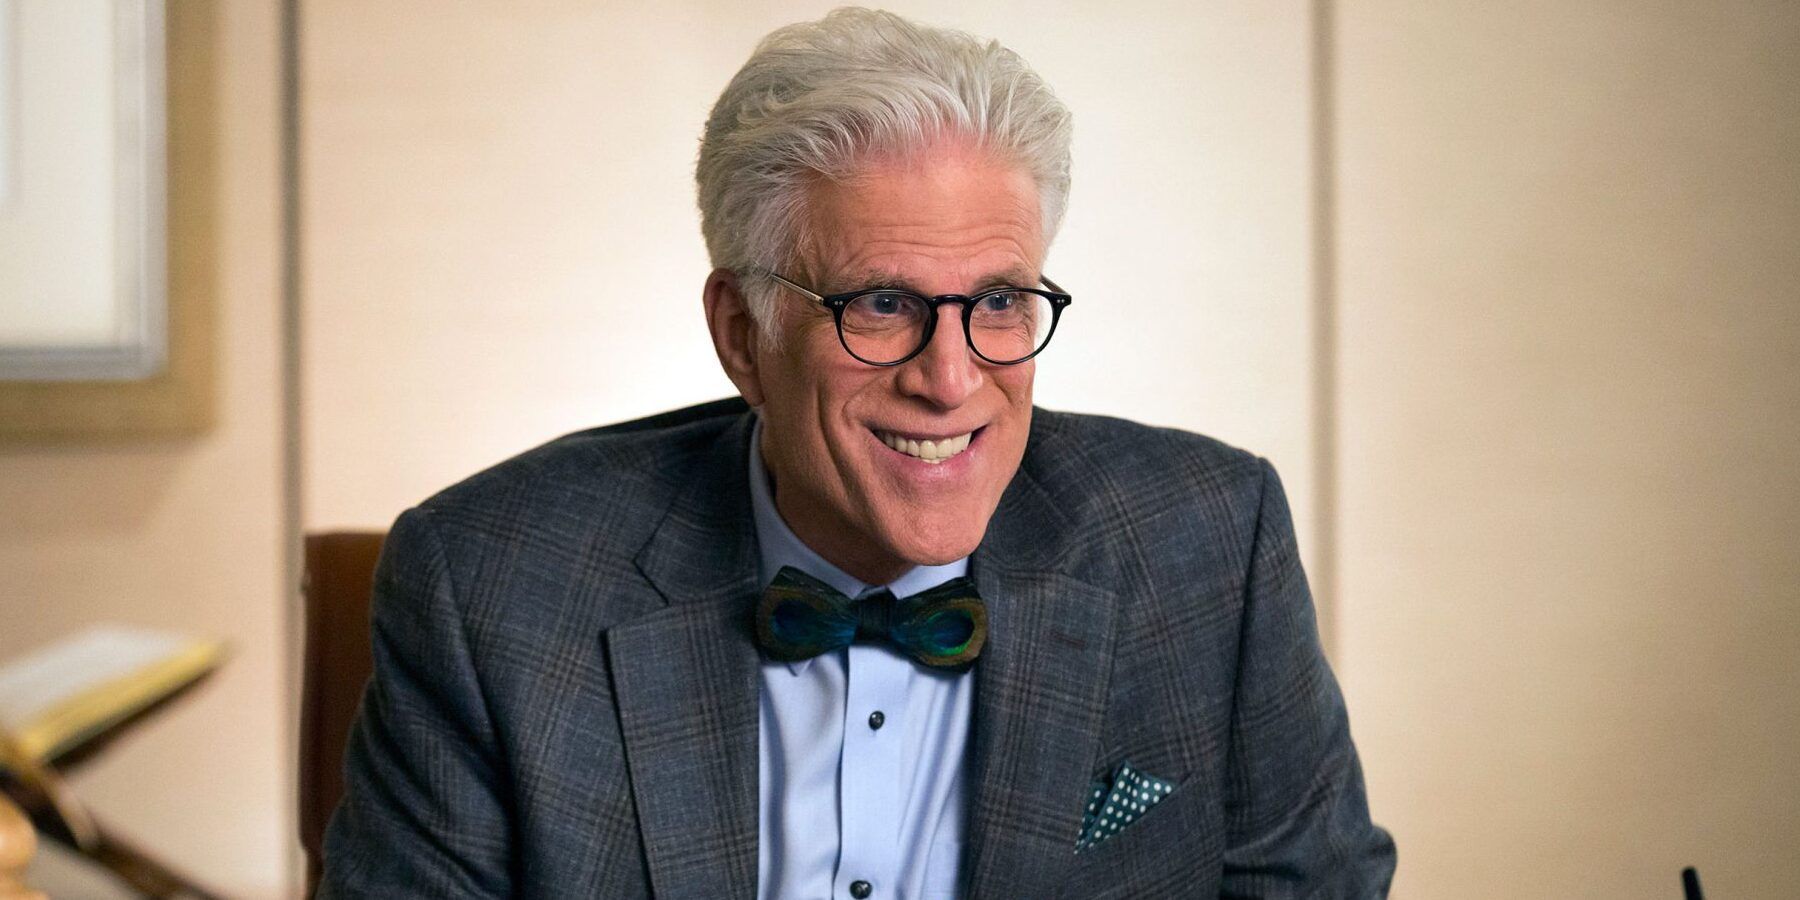 Ted Danson in The Good Place smiling at someone while wearing a bow tie and suit